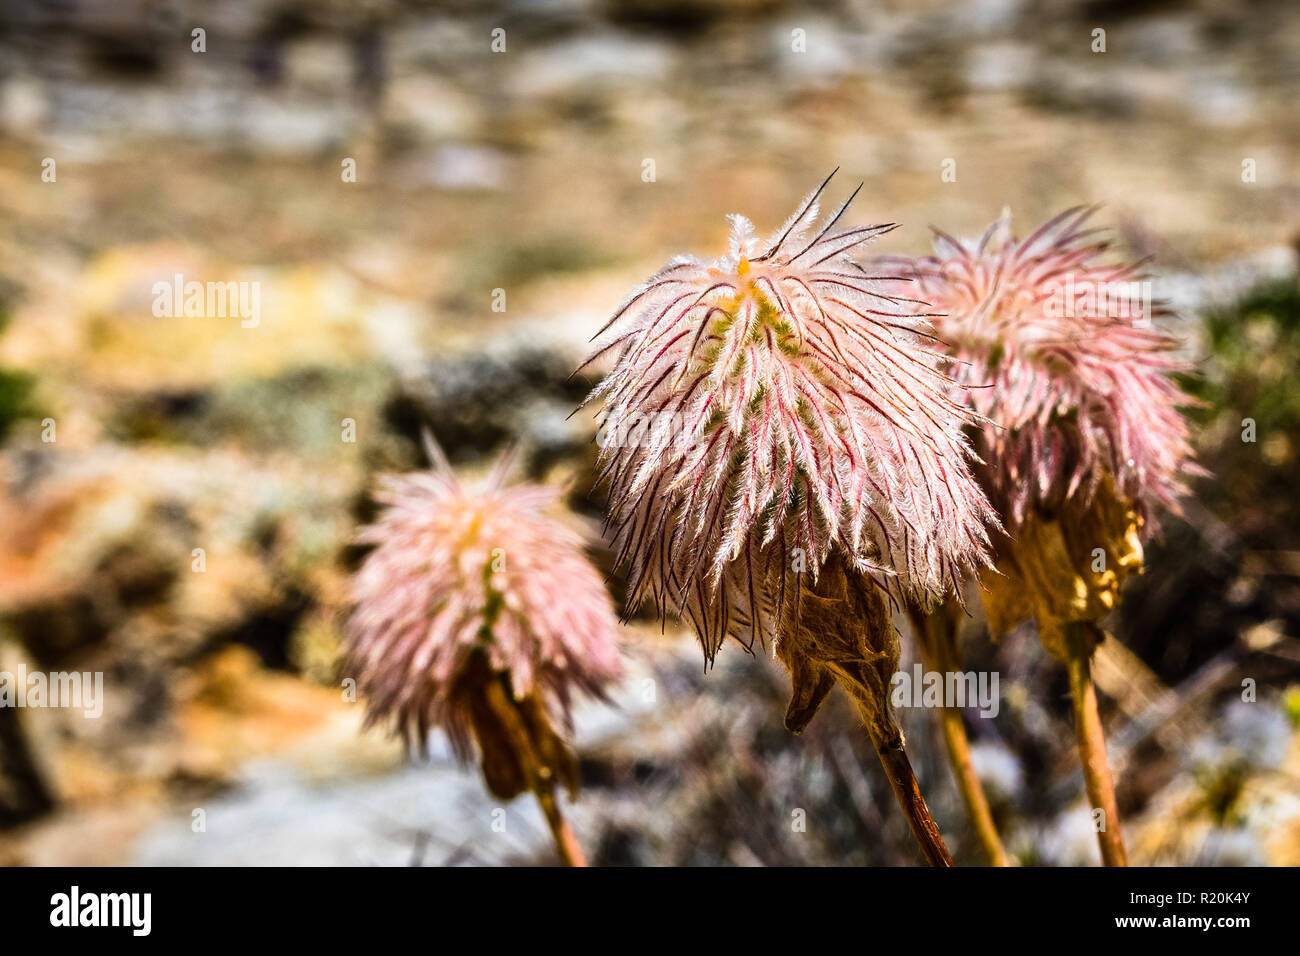 Close up of Western anemone (Anemone occidentalis) gone to seed on the slopes of Sierra Nevada mountains, Sequoia National Park, California Stock Photo